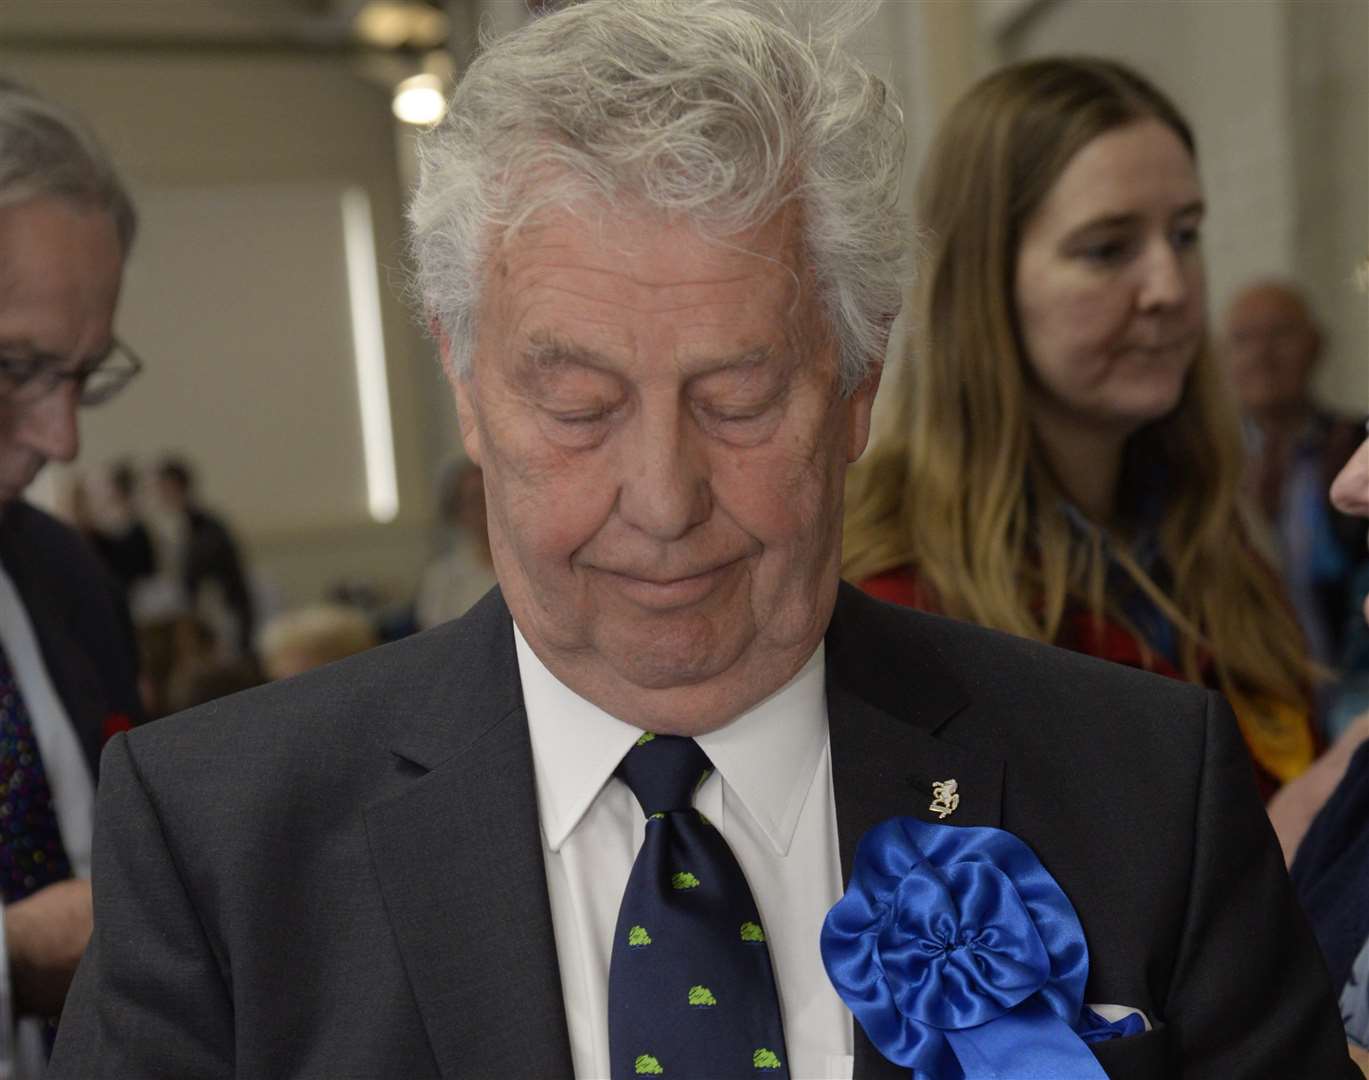 Cllr Alan Marsh had the Conservative whip removed after the allegations emerged. Picture: Chris Davey